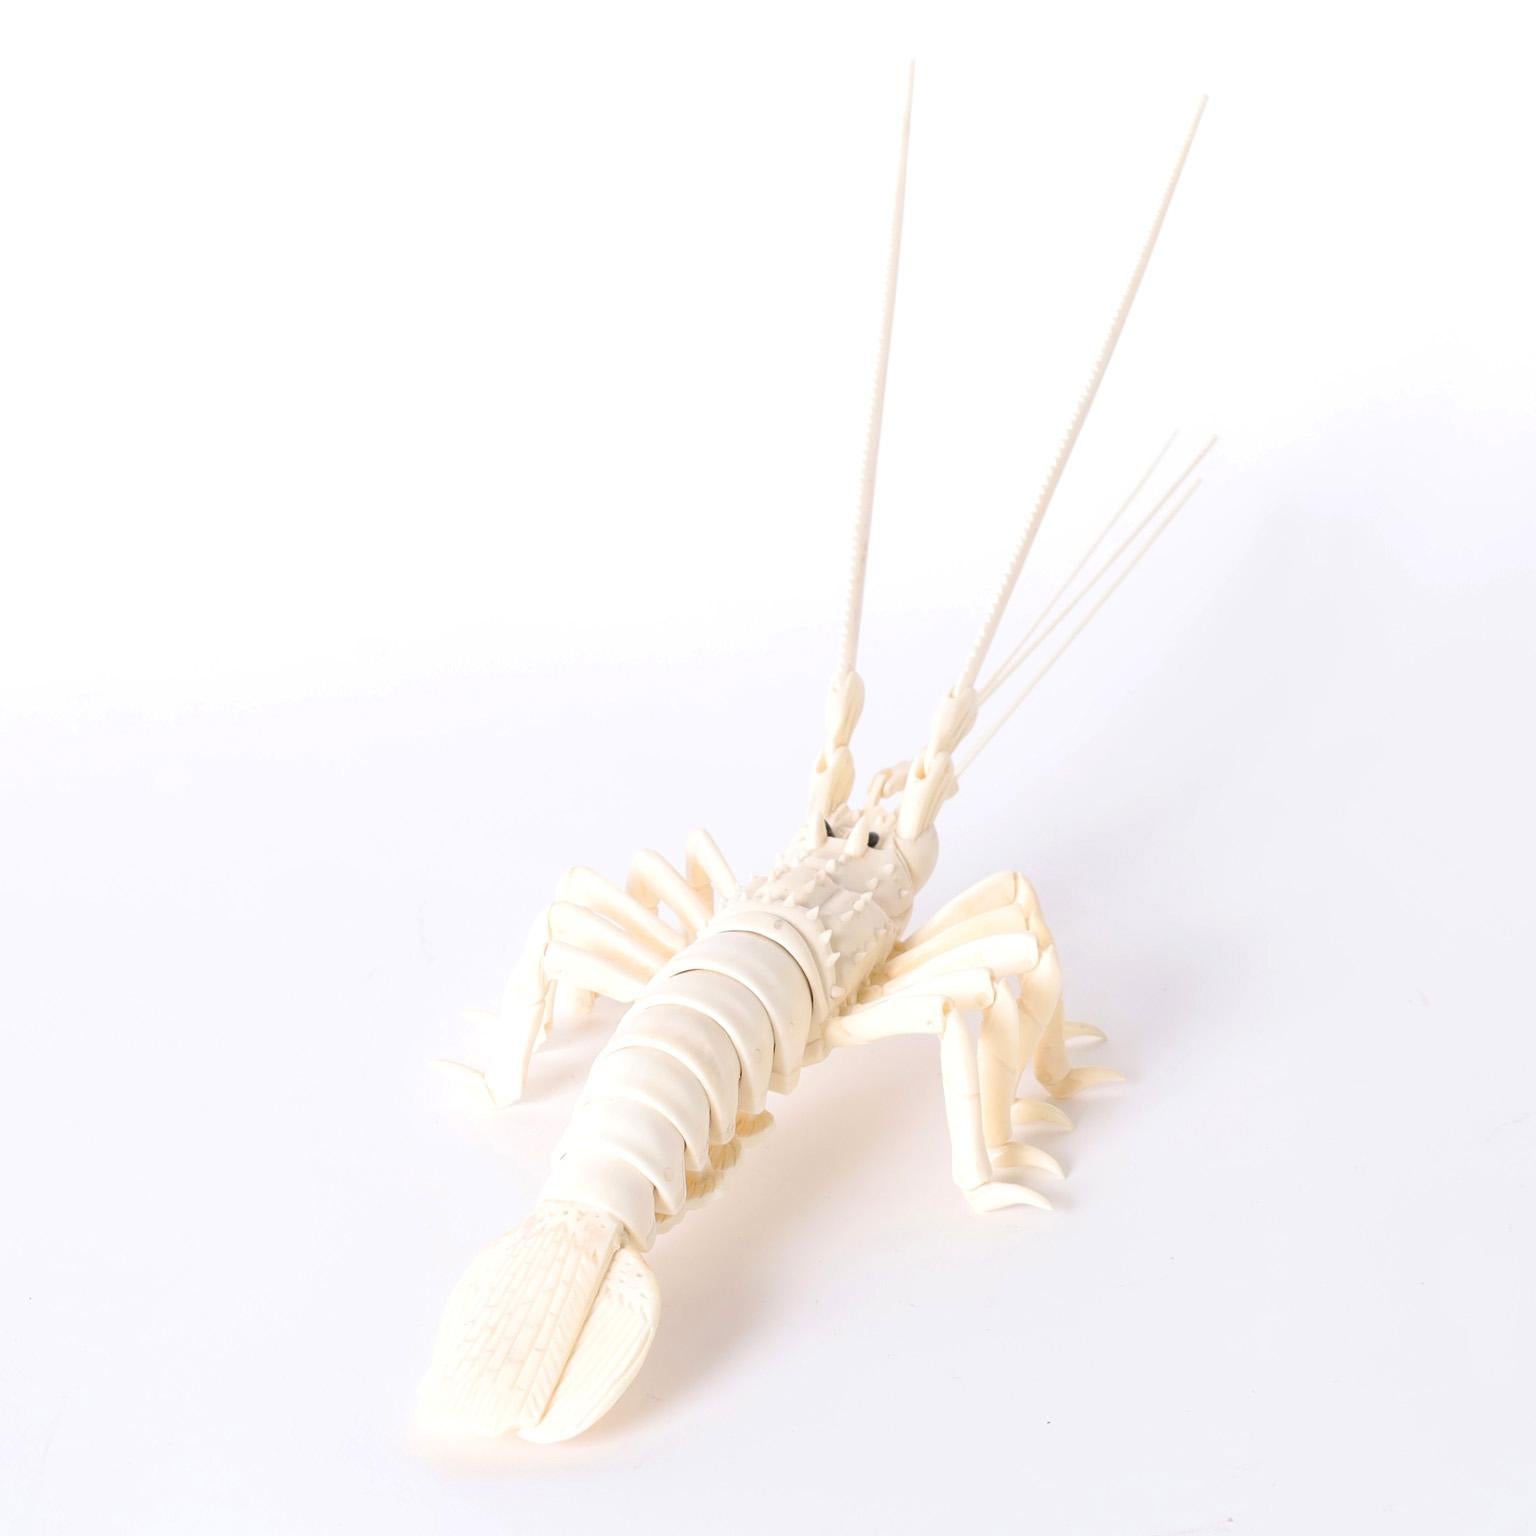 Lobster sculpture or object of art crafted in carved bone with hinged antennae and flexible tail. Our other listings contain. a larger lobster, crabs and turtles.
These are no longer being made.